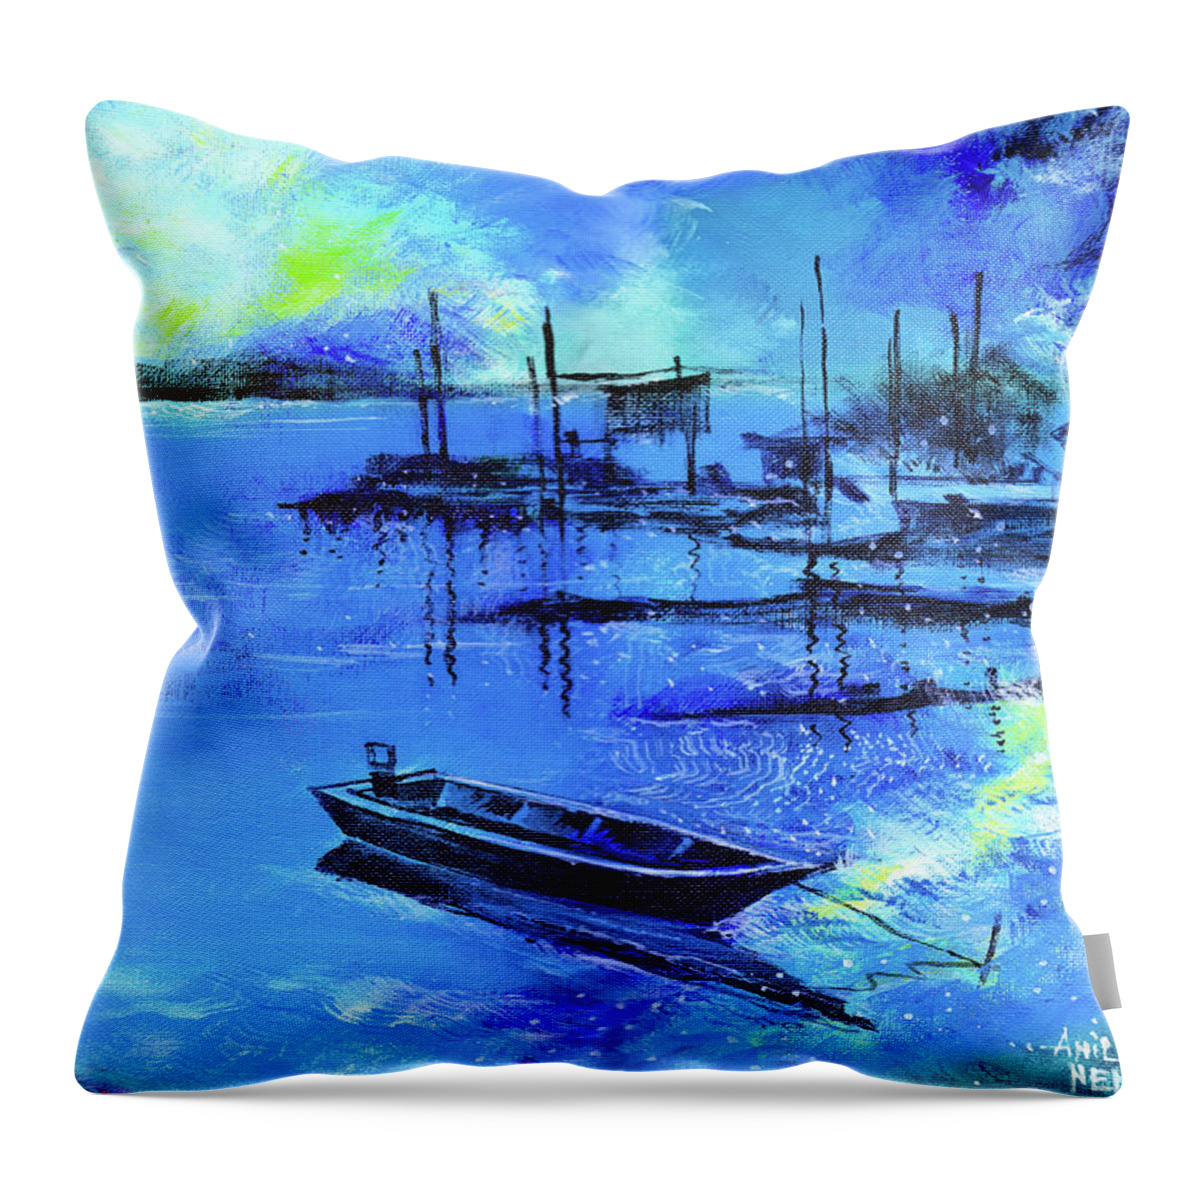 Nature Throw Pillow featuring the painting Blue Dream 2 by Anil Nene